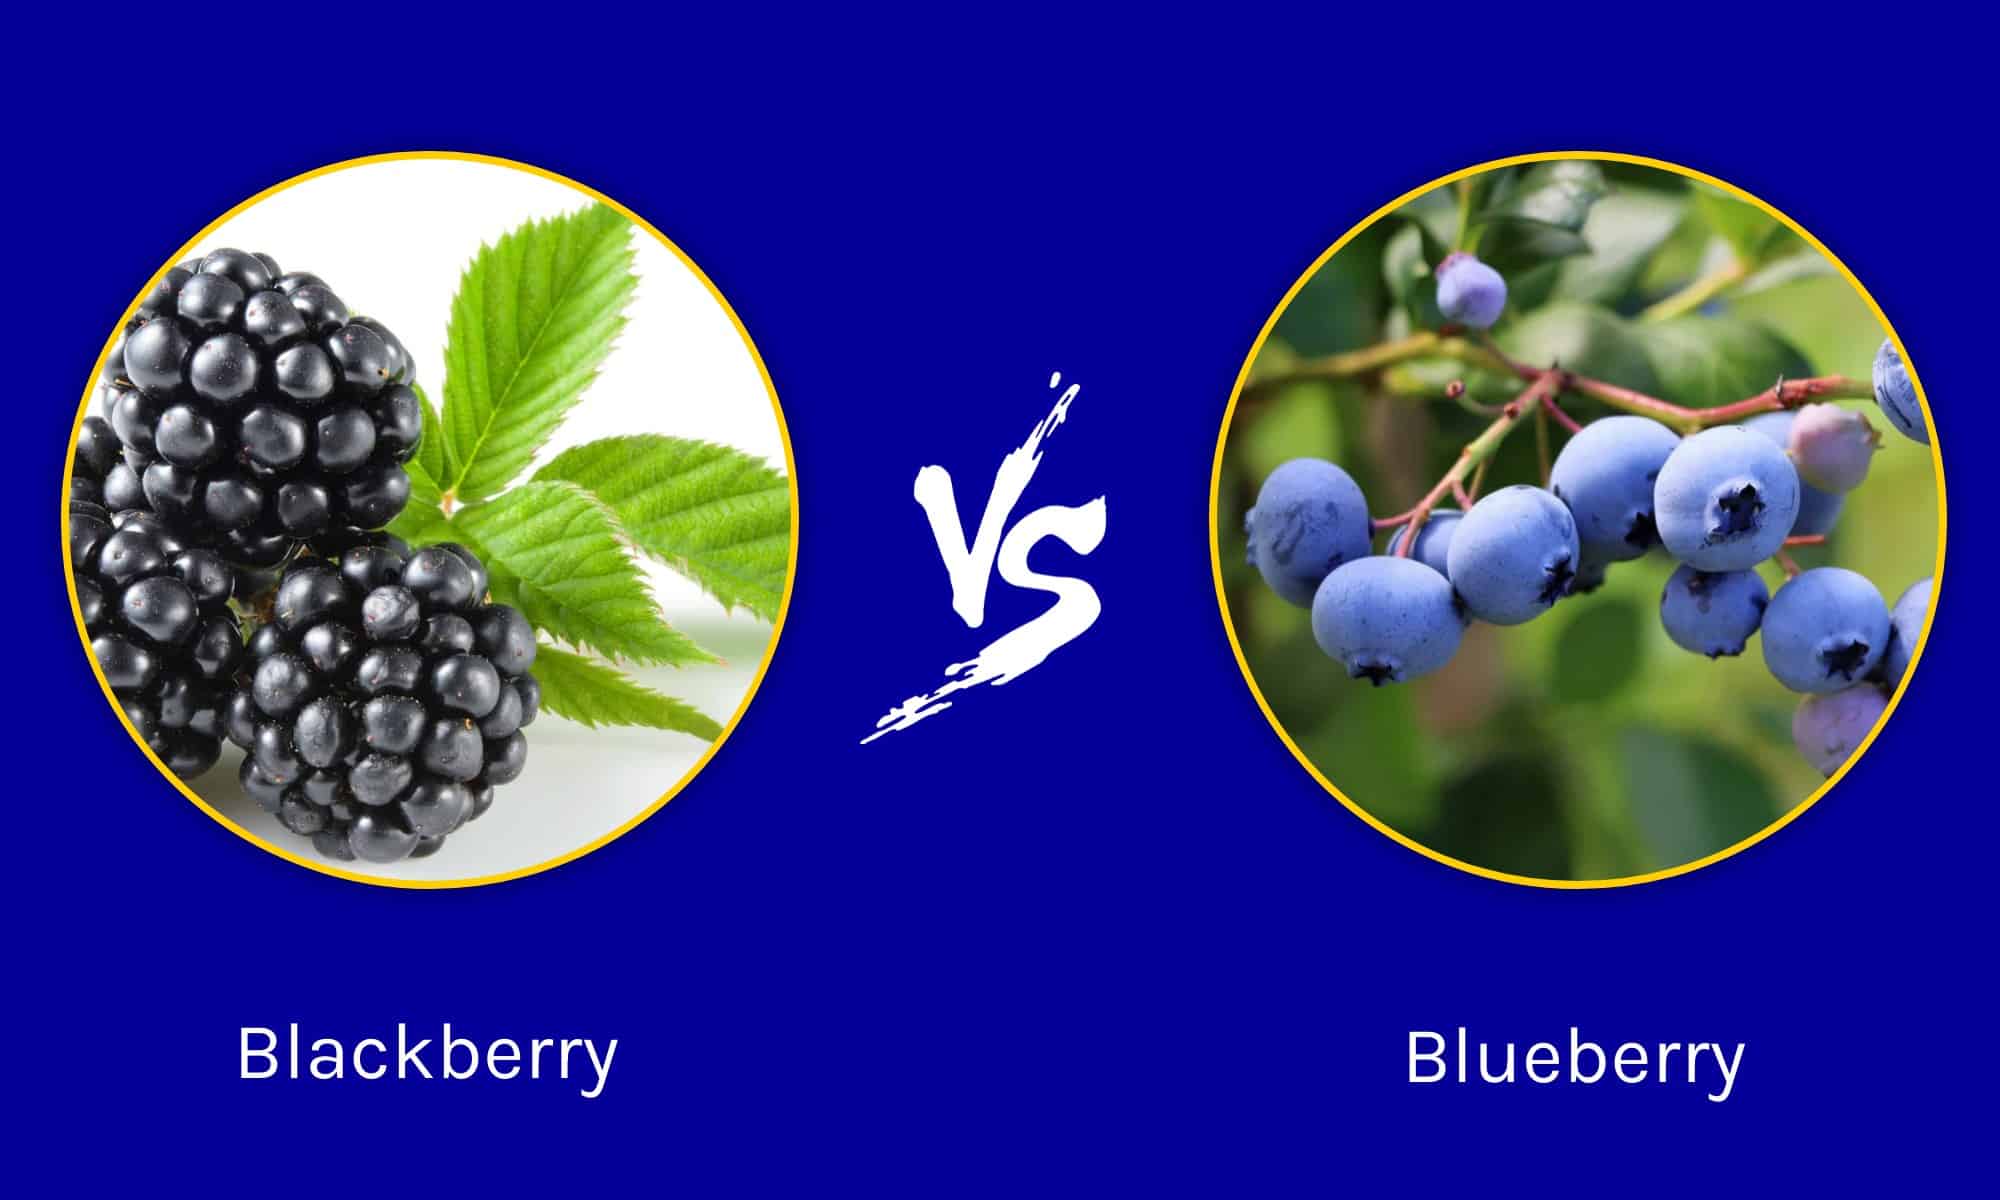 The Ultimate Guide To Companion Planting Blackberries - free91dom